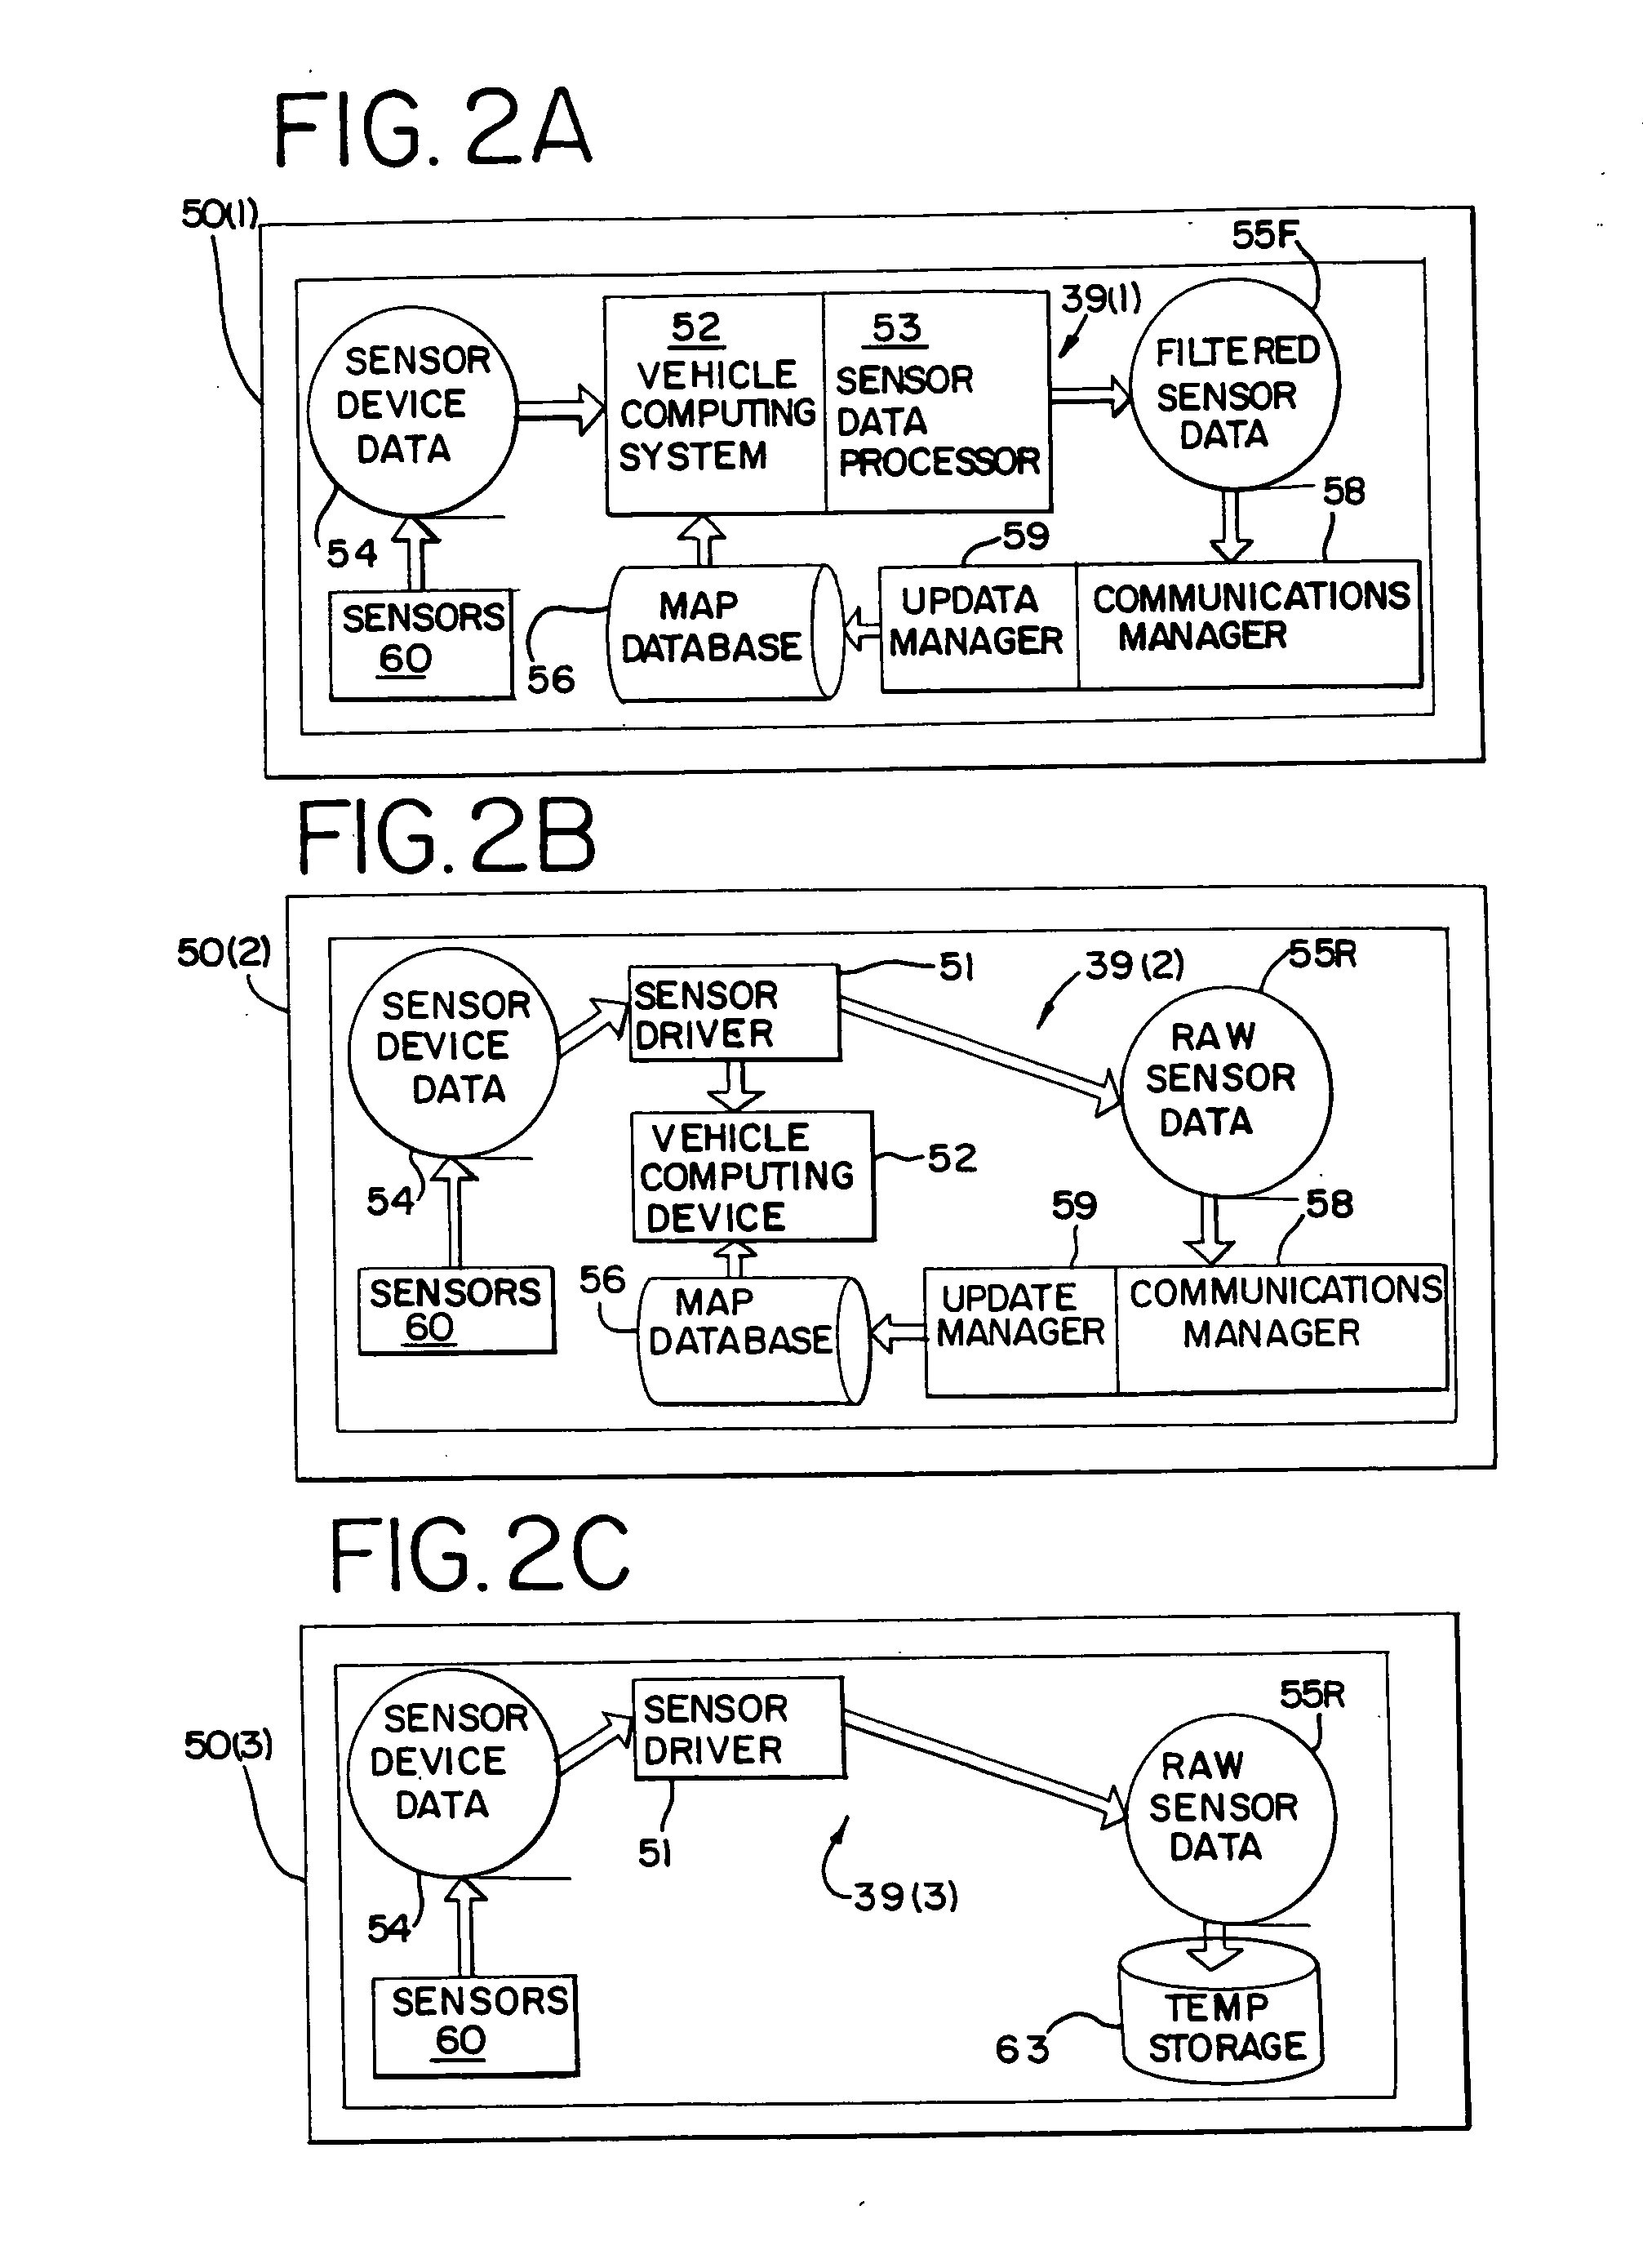 System and method for updating, enhancing, or refining a geographic database using feedback